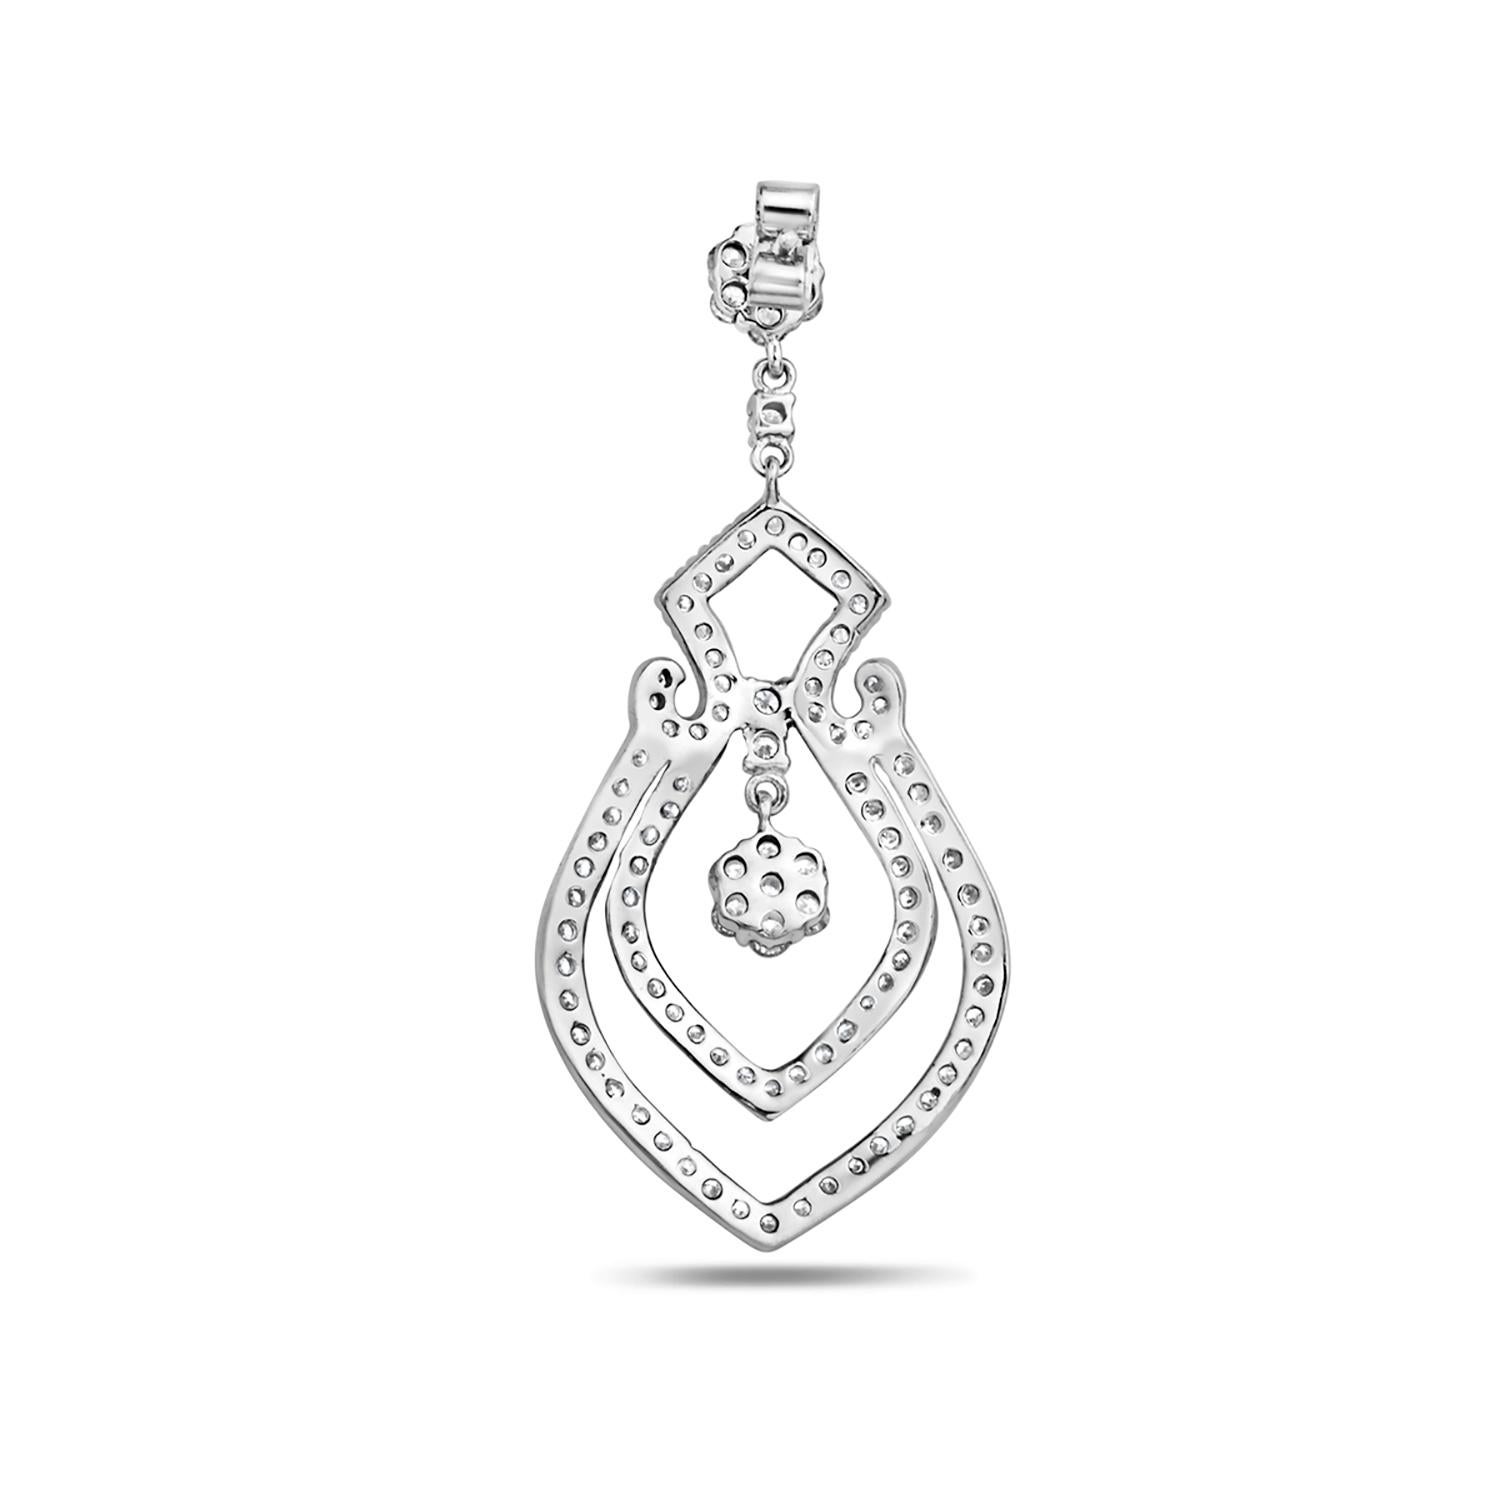 Mixed Cut High Quality VS Diamonds Dangle Earrings Made in 18k White Gold For Sale